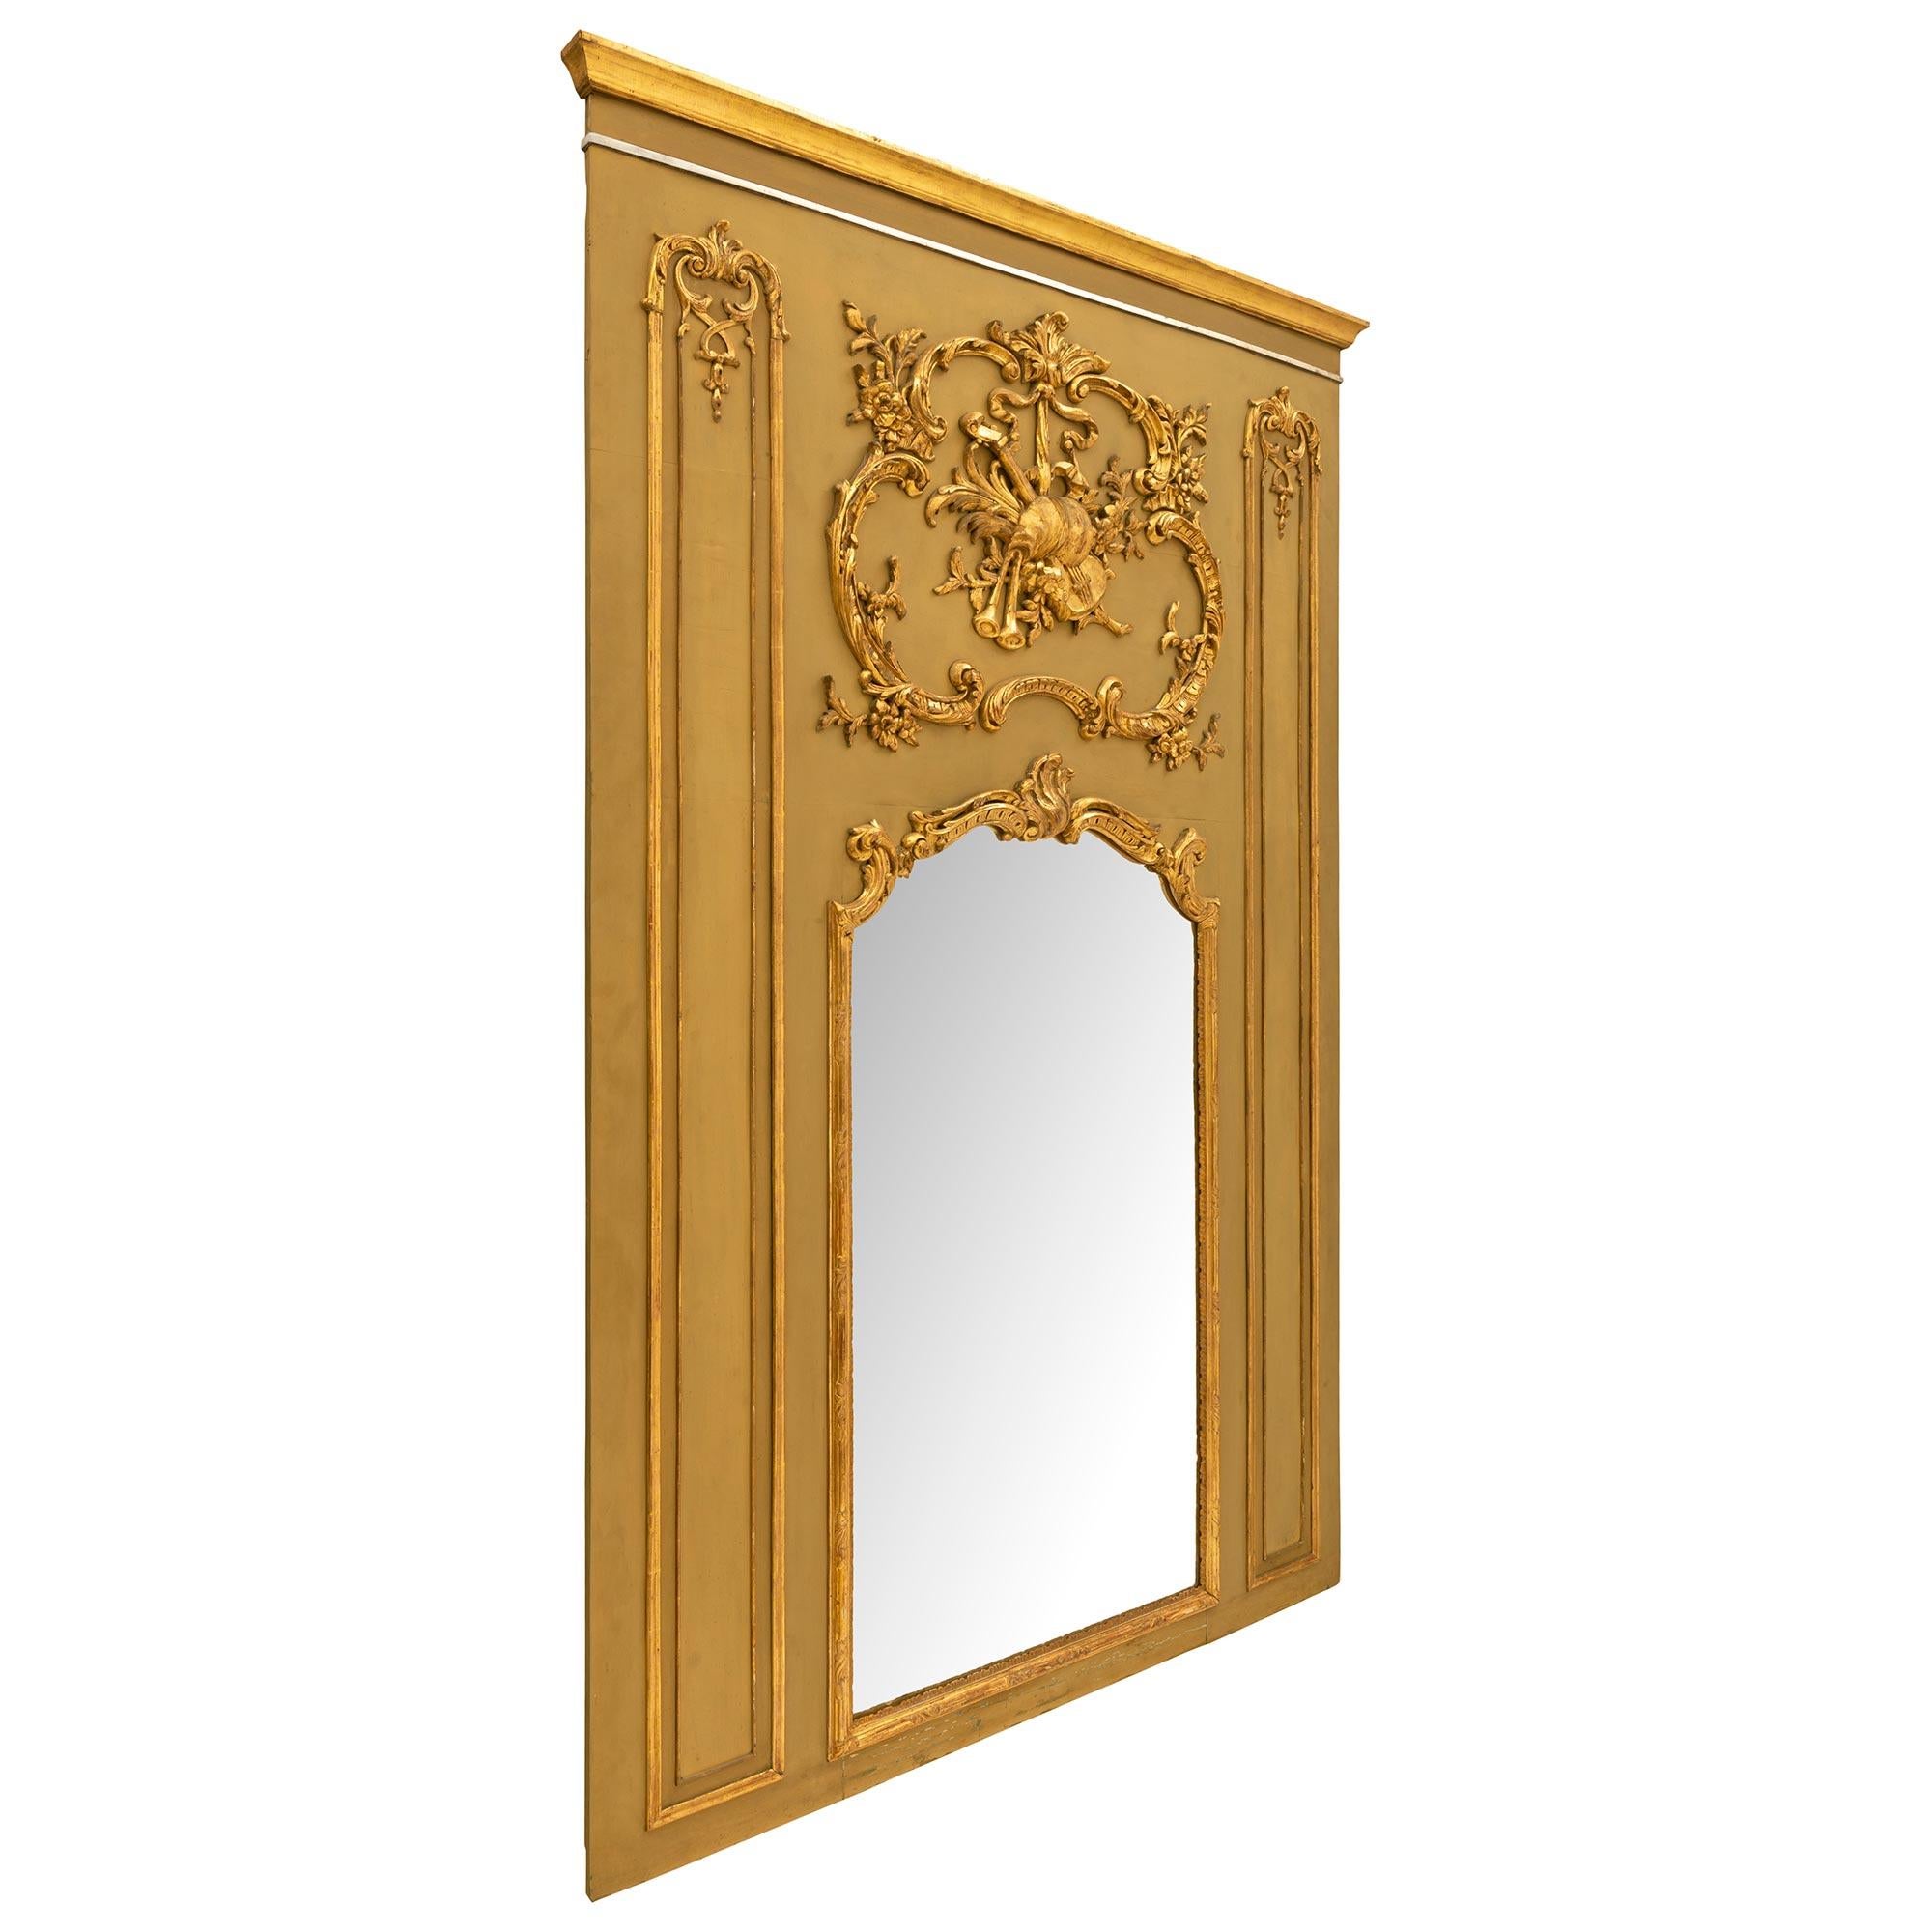 French Louis XV or xvi Style Giltwood Trumeau In Good Condition For Sale In West Palm Beach, FL